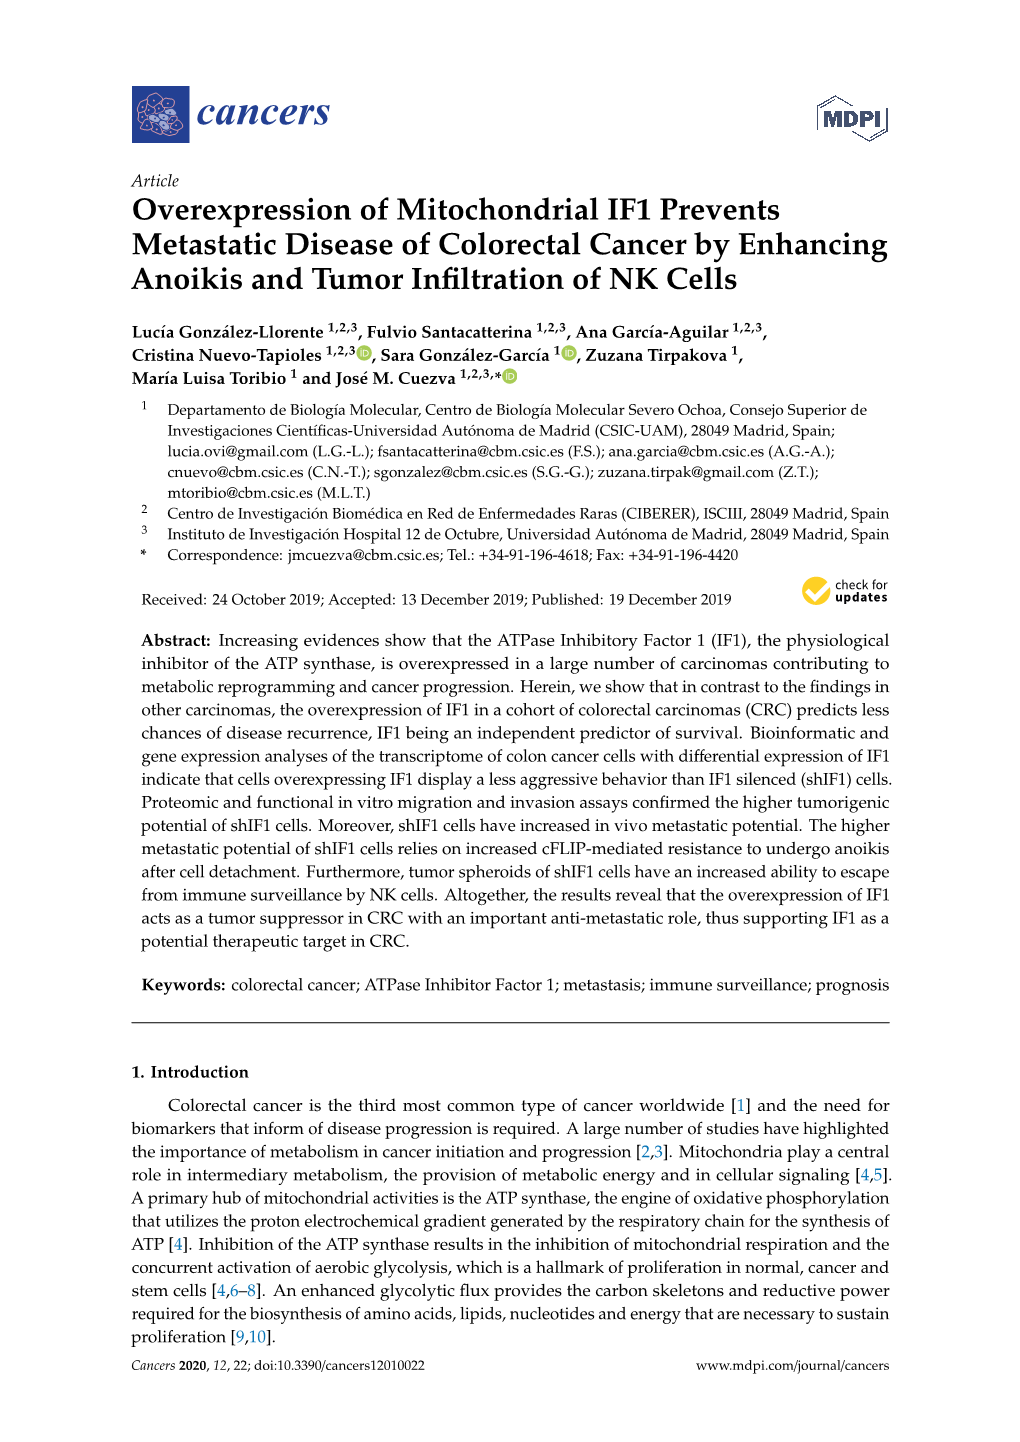 Overexpression of Mitochondrial IF1 Prevents Metastatic Disease of Colorectal Cancer by Enhancing Anoikis and Tumor Inﬁltration of NK Cells